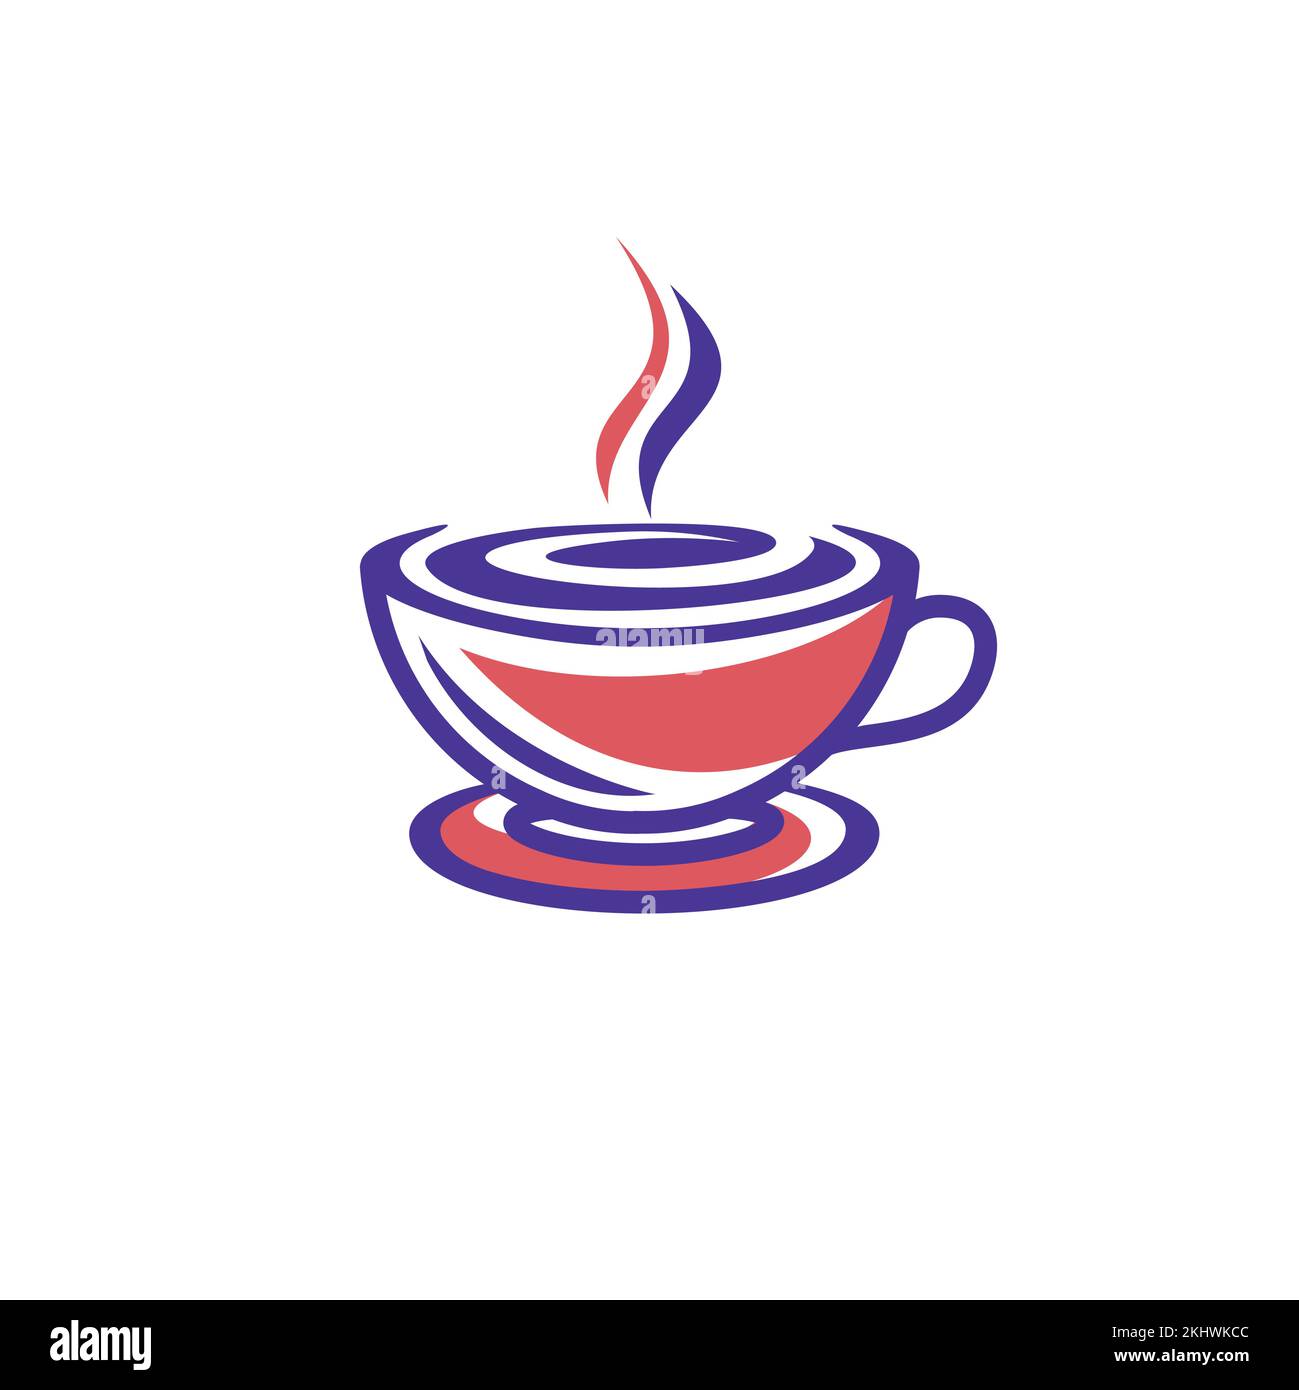 Illustration coffee of a cup Stock Vector